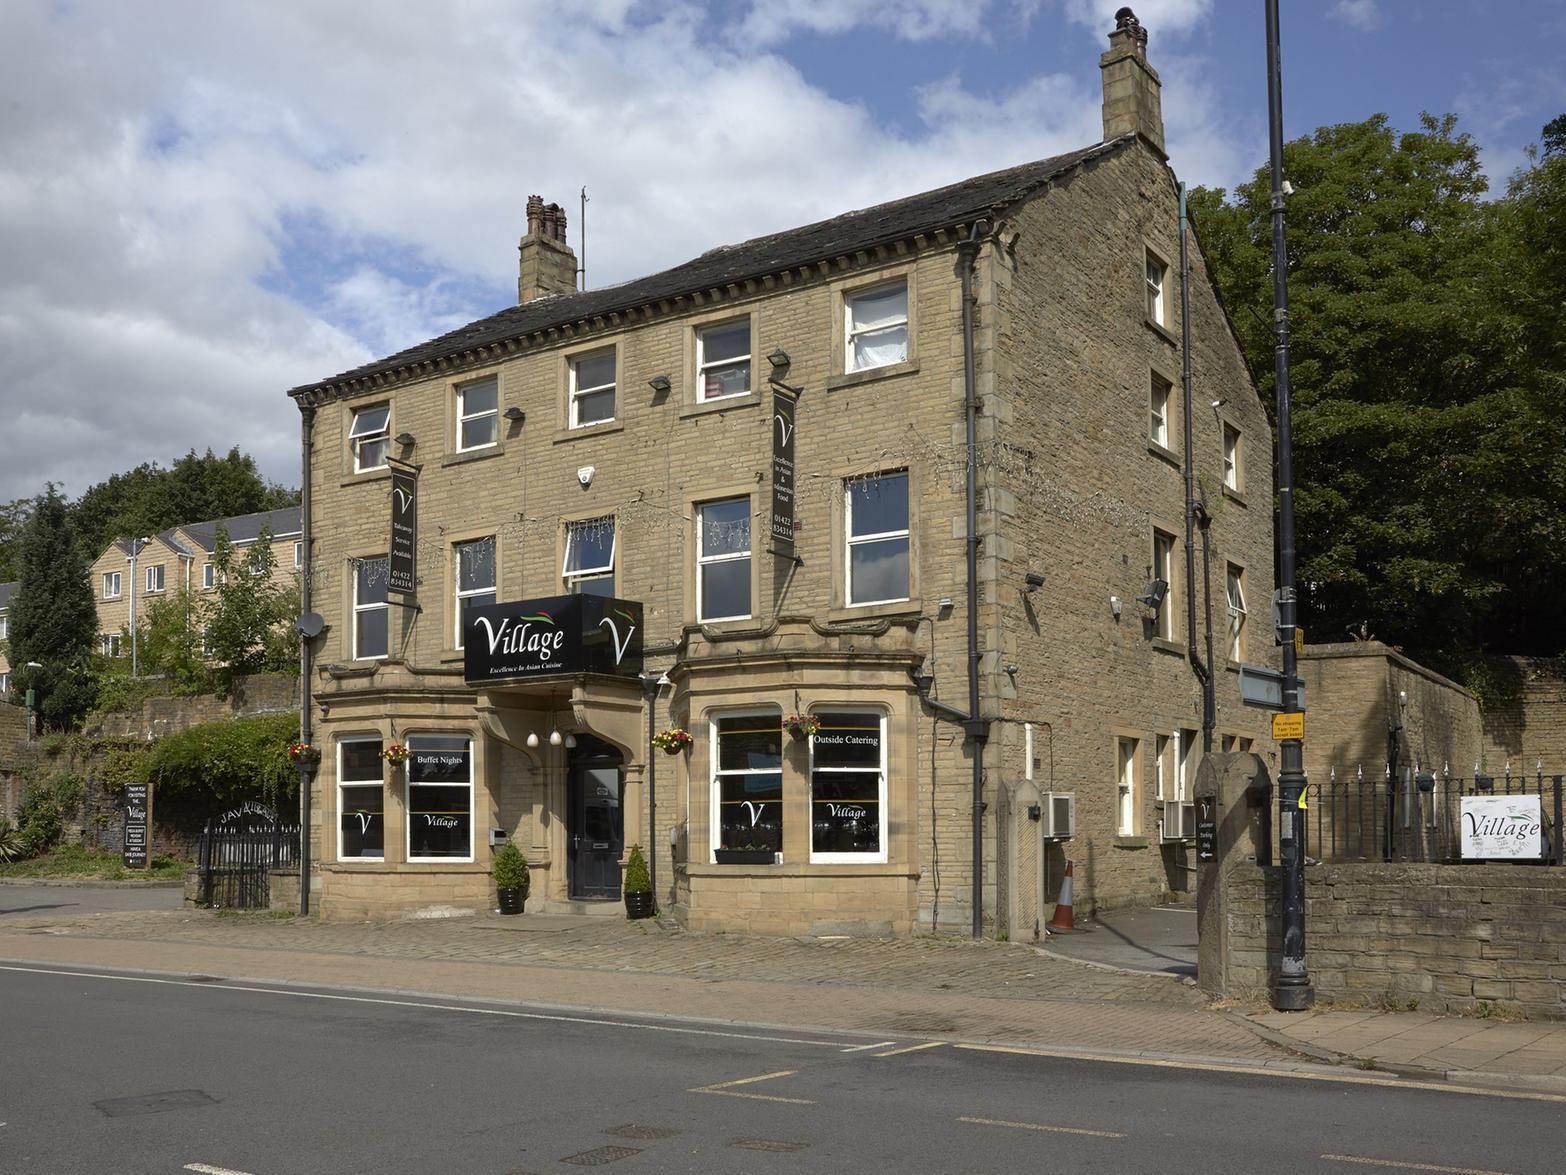 The Hare and Hounds prides itself on being a warm and friendly gastro pub, with a whole new refurbishment in place to give their customers the high end upmarket feel.